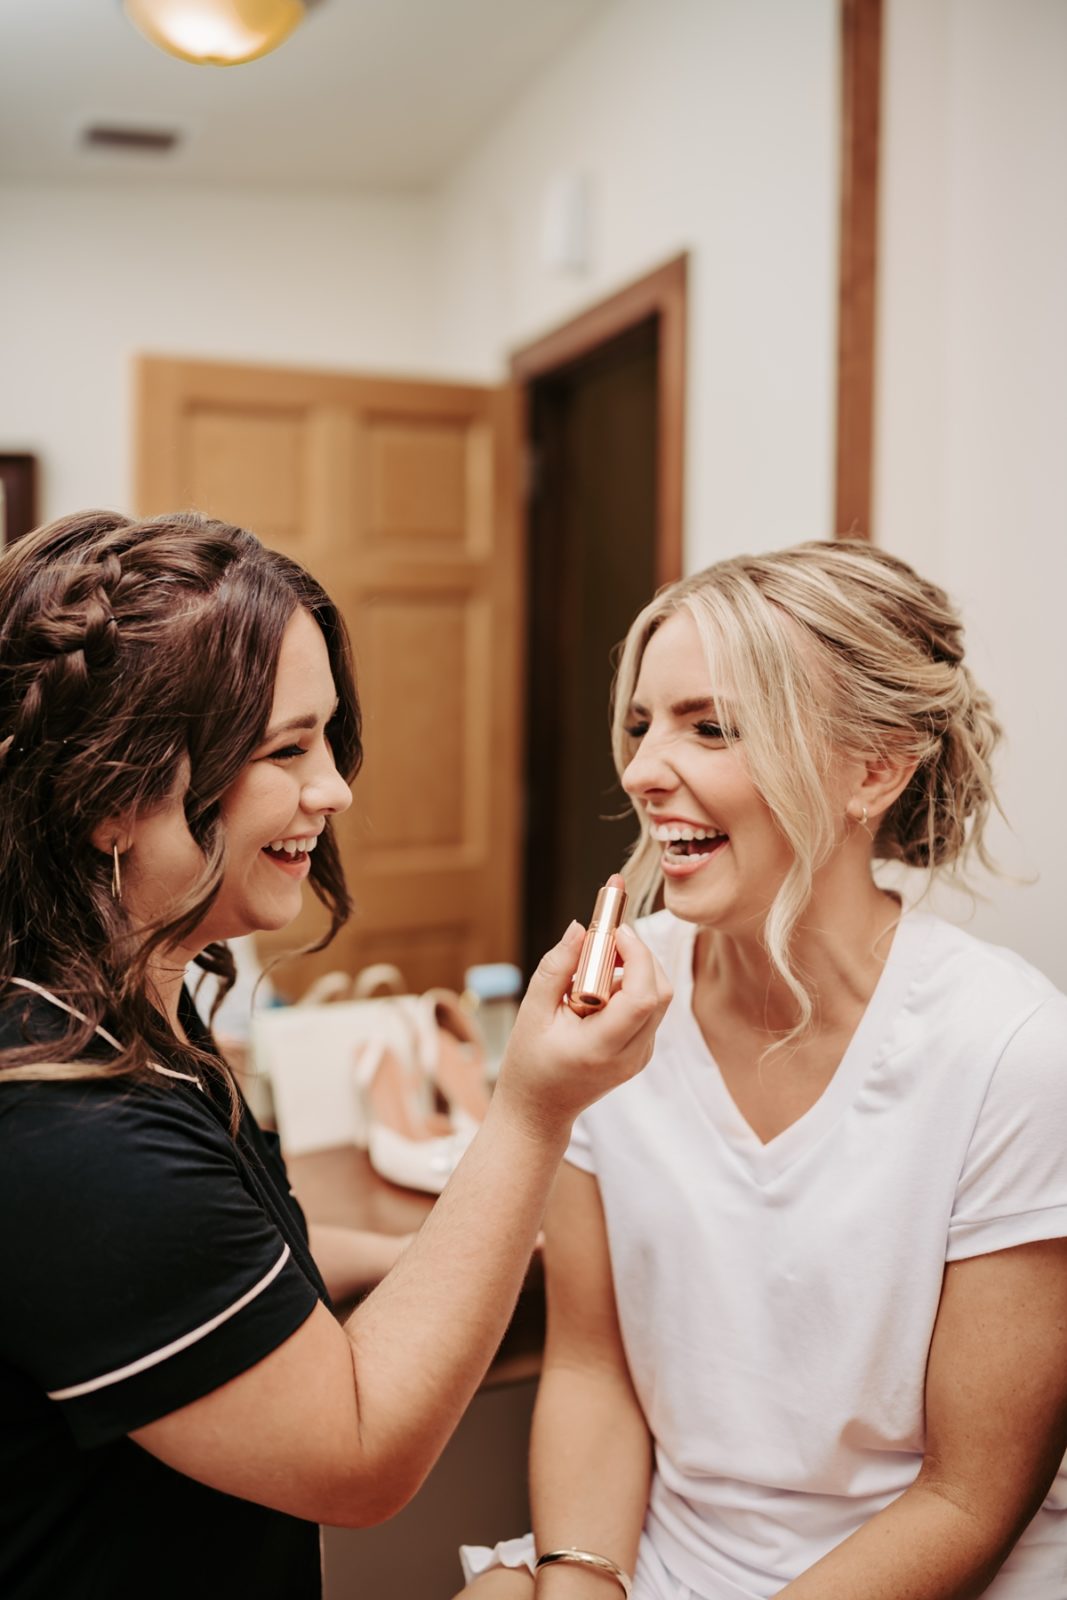 Bridesmaid helping bride apply lipstick and laughing